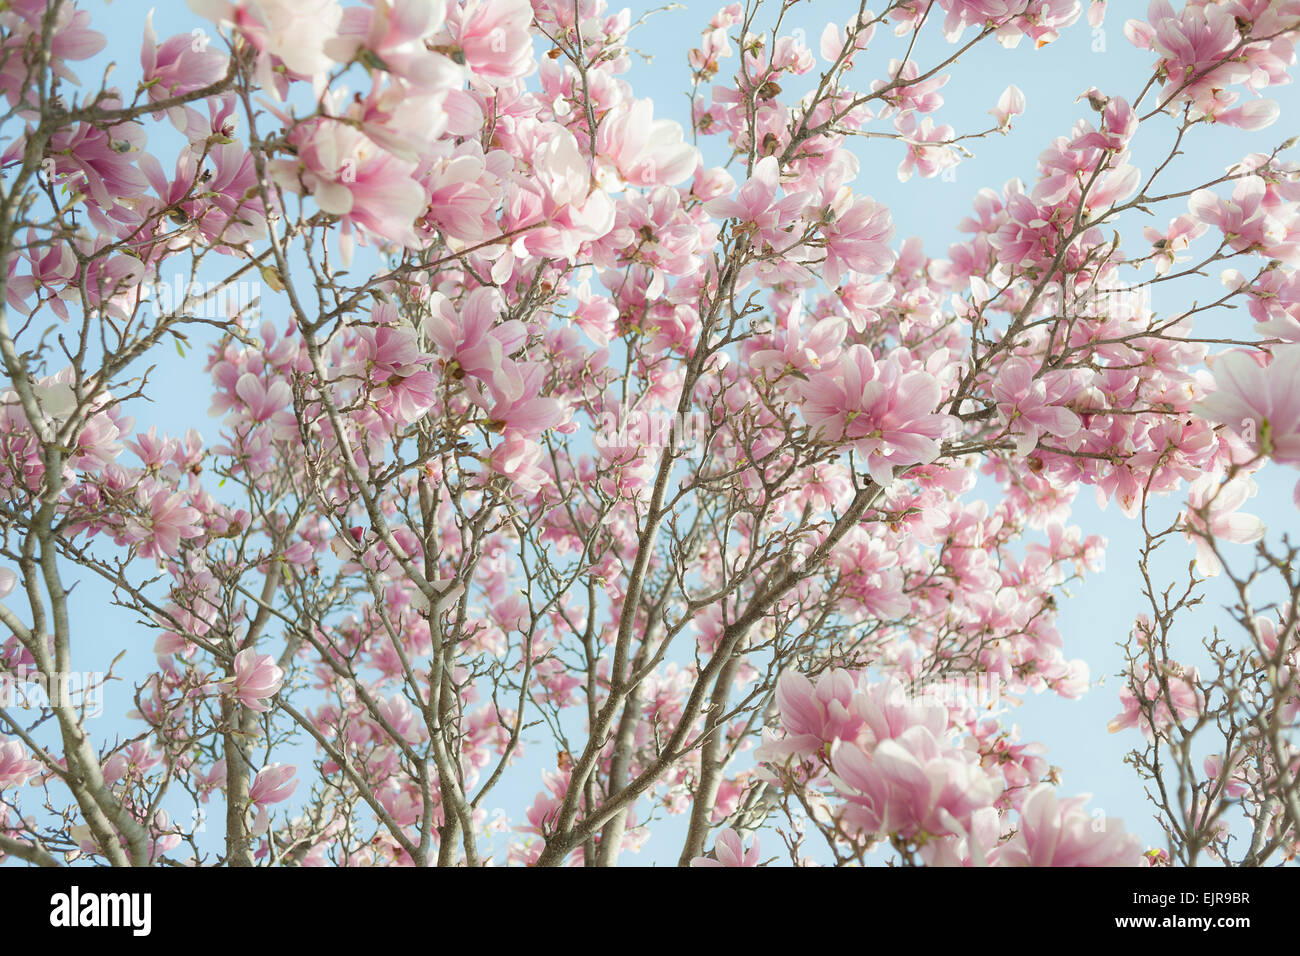 Low angle view of flowering tree branches pink spring flowers Stock Photo